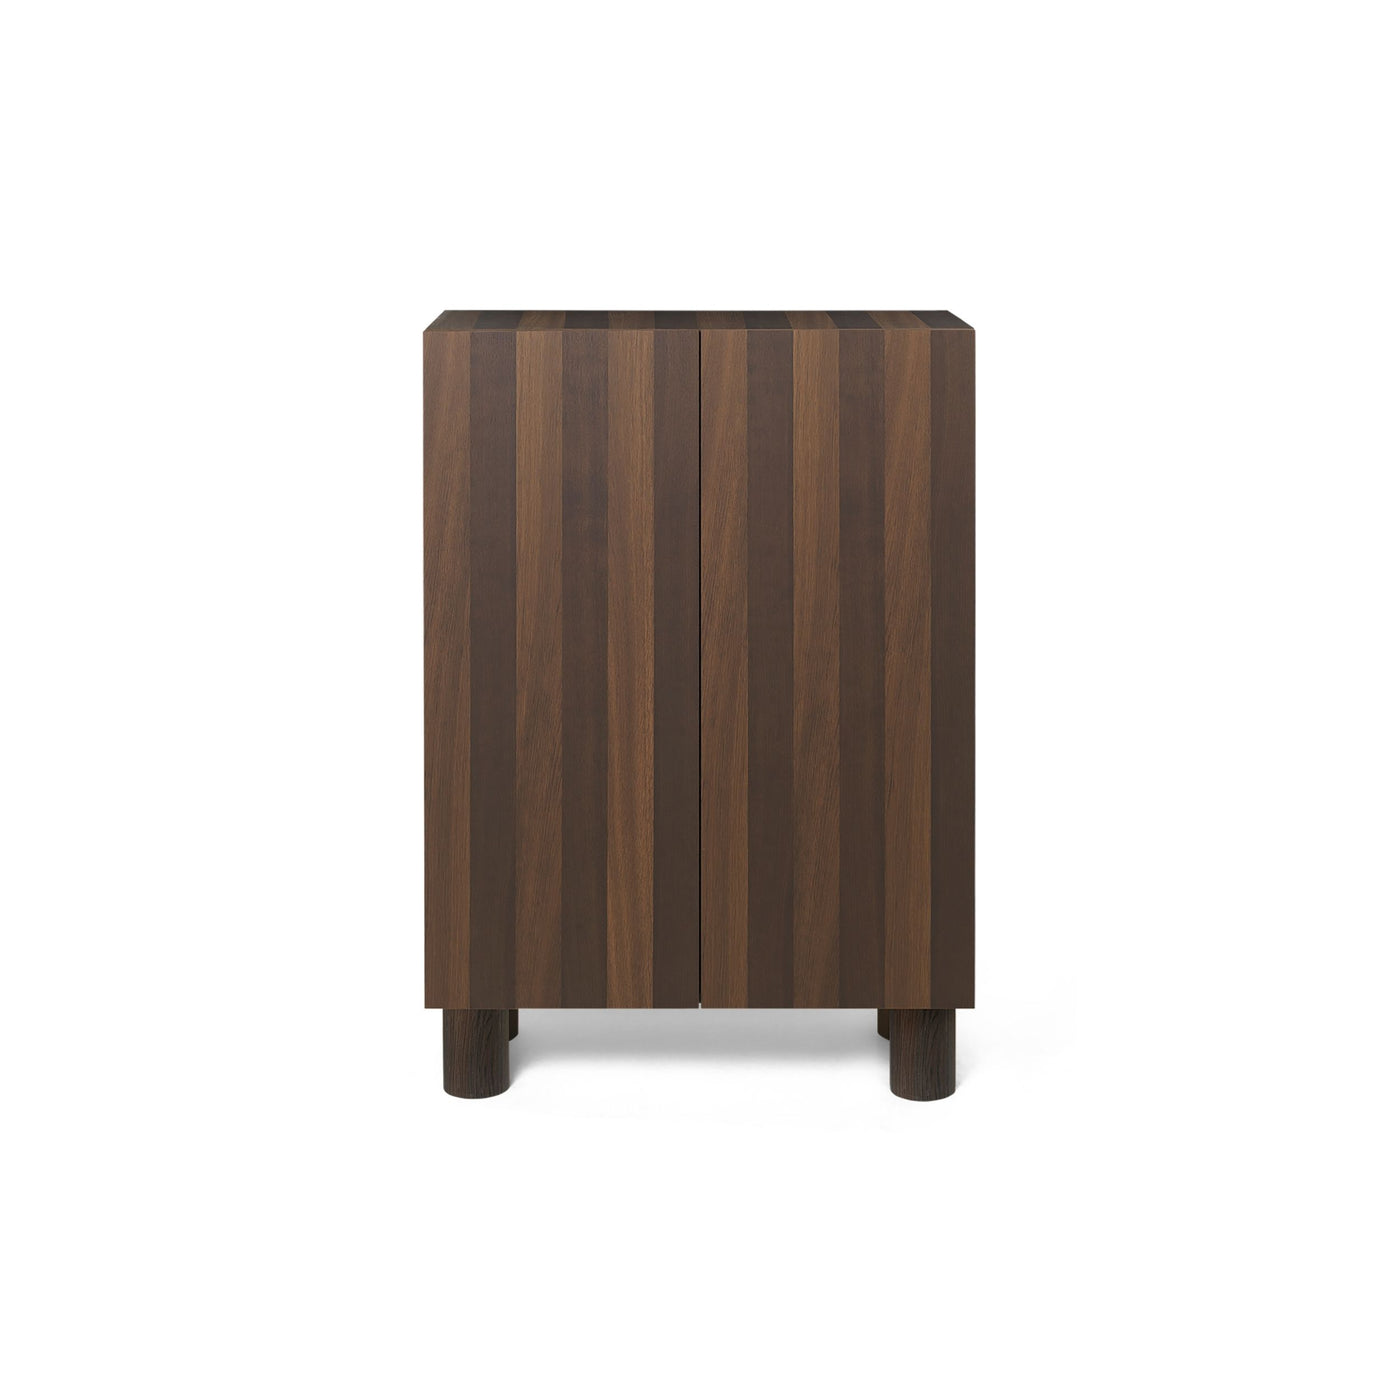 Ferm Living Post Storage Cabinet. Free UK delivery at someday designs